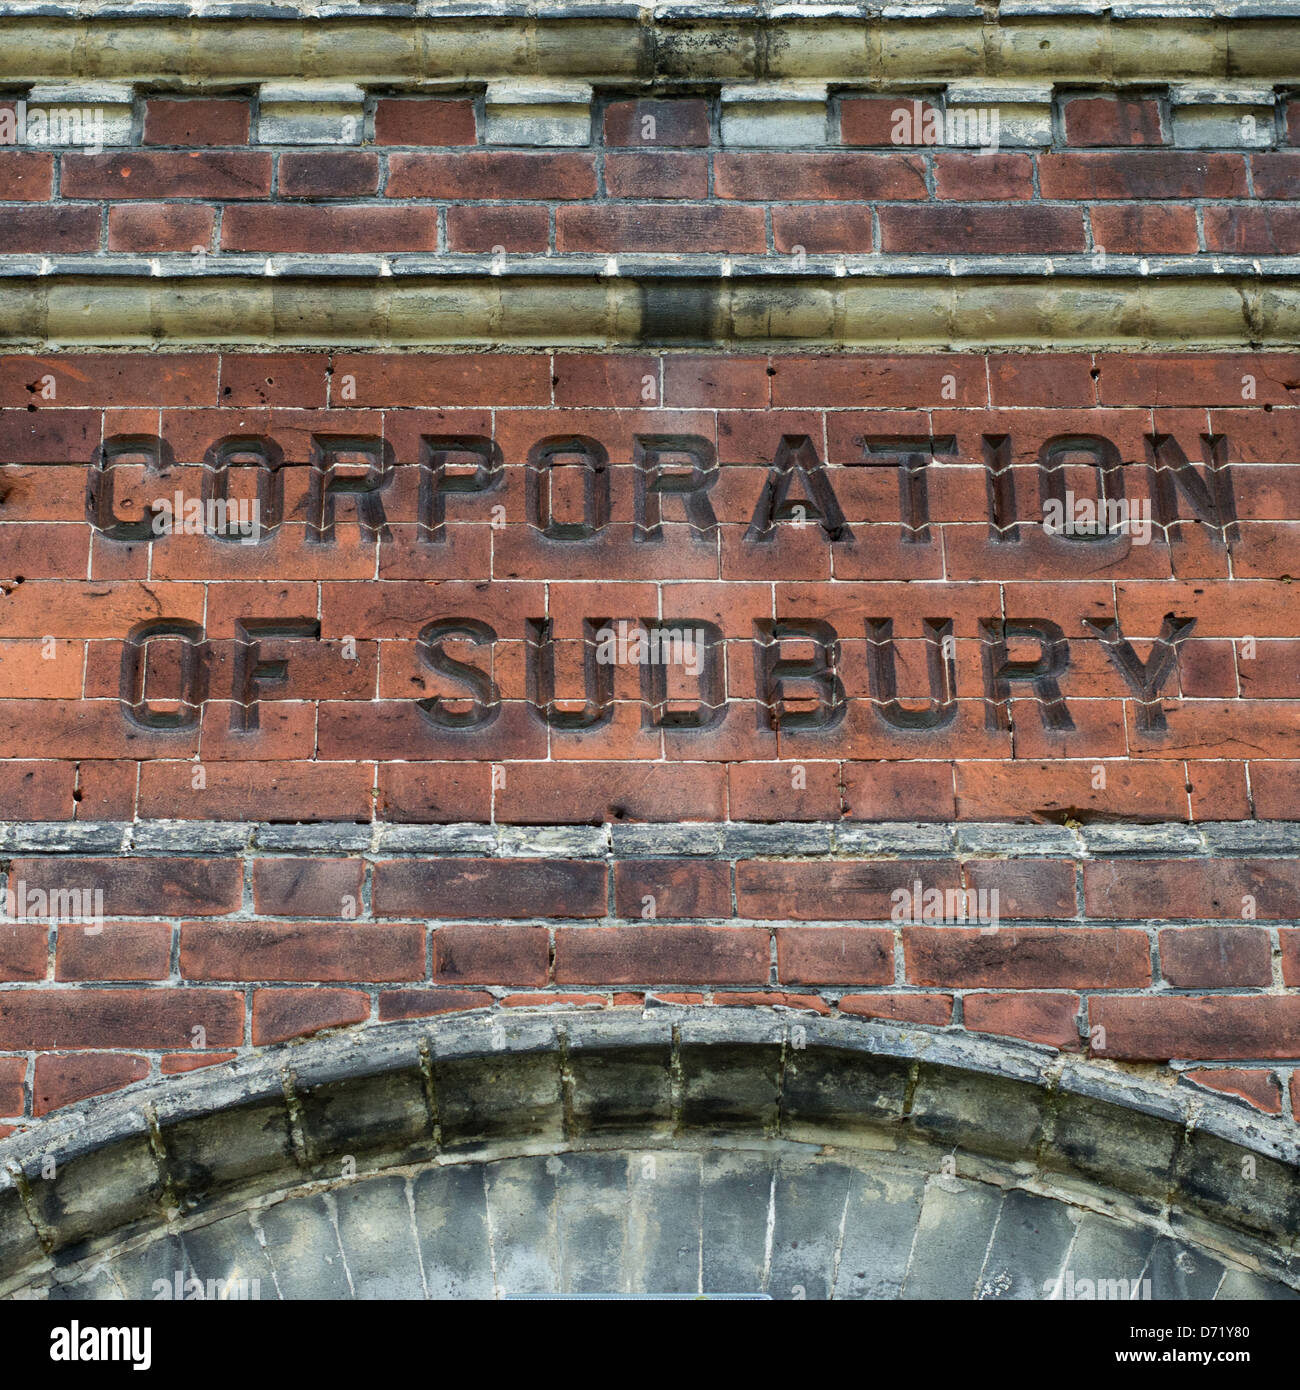 The words Corporation of Sudbury chiseled into brickworks of an old public utility building. Stock Photo